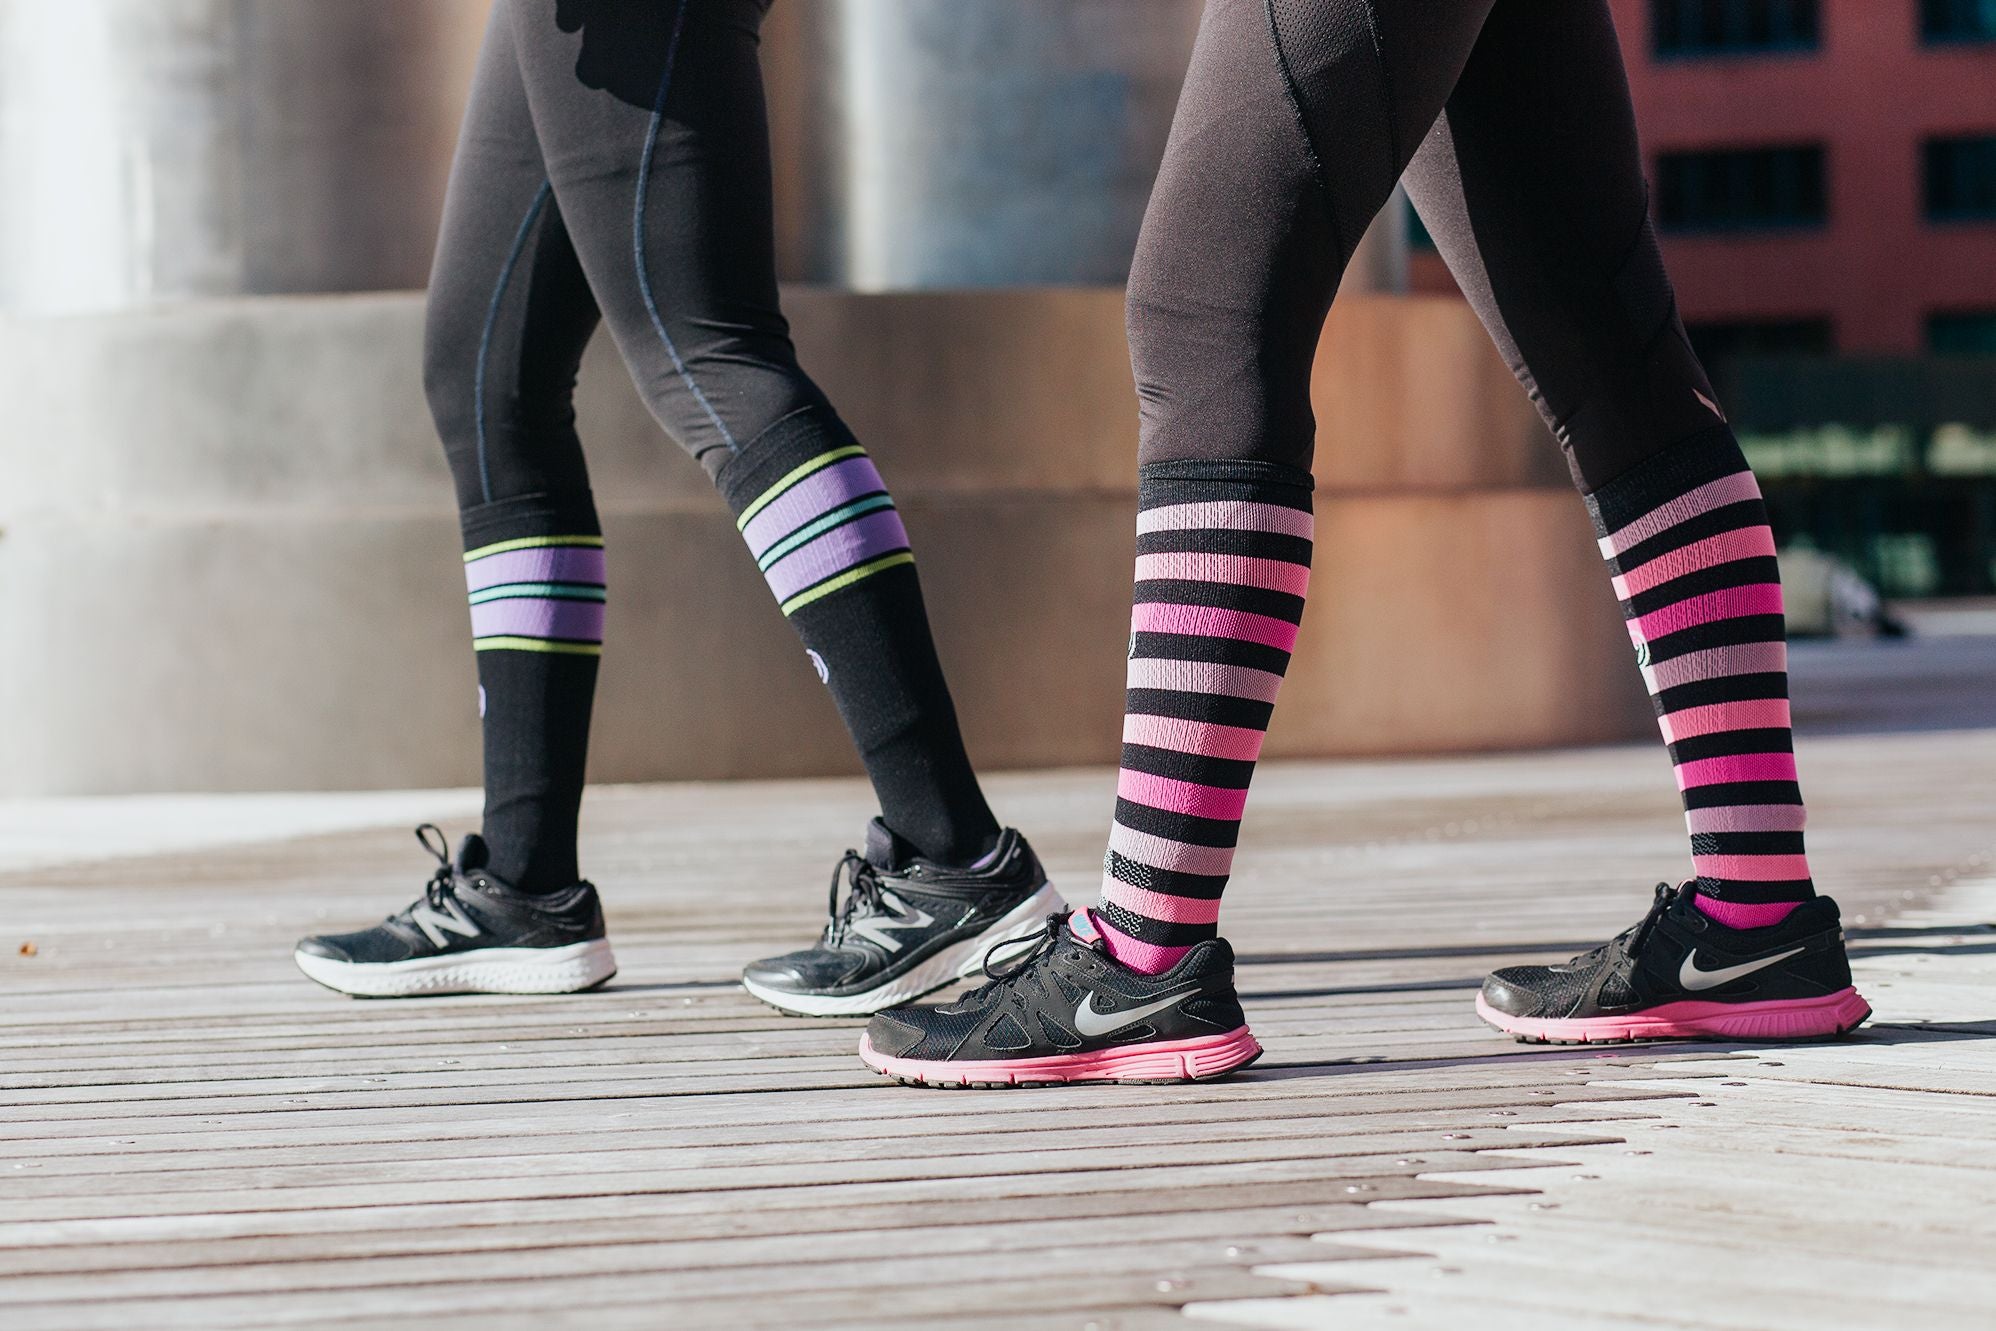 New to Compression Socks? A Beginner's Guide to Everything You